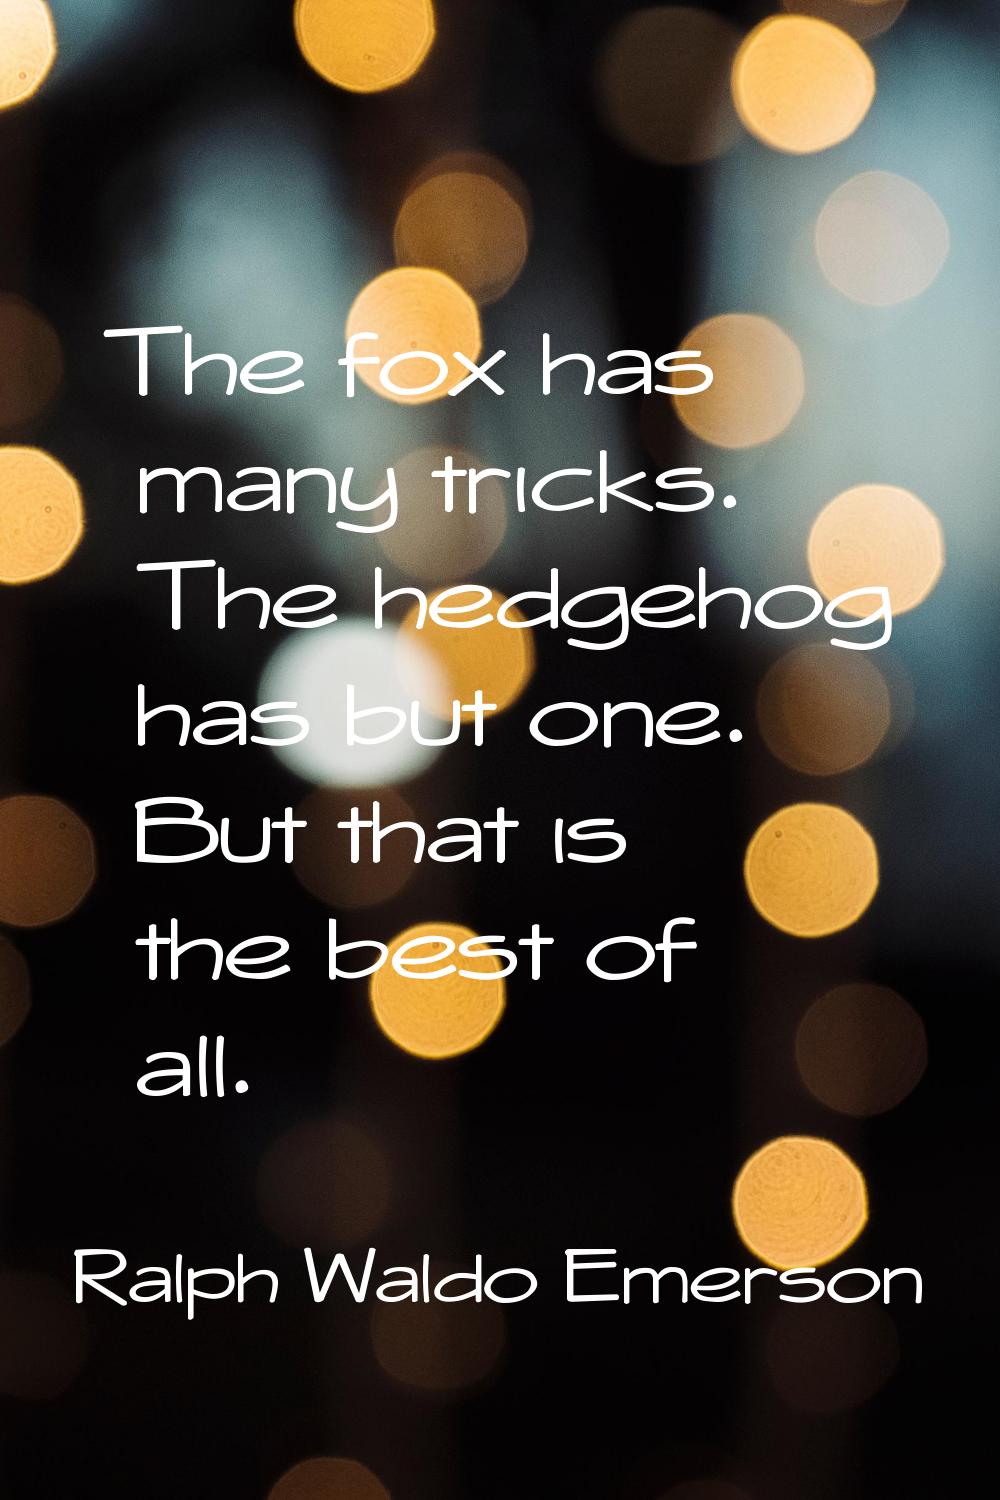 The fox has many tricks. The hedgehog has but one. But that is the best of all.